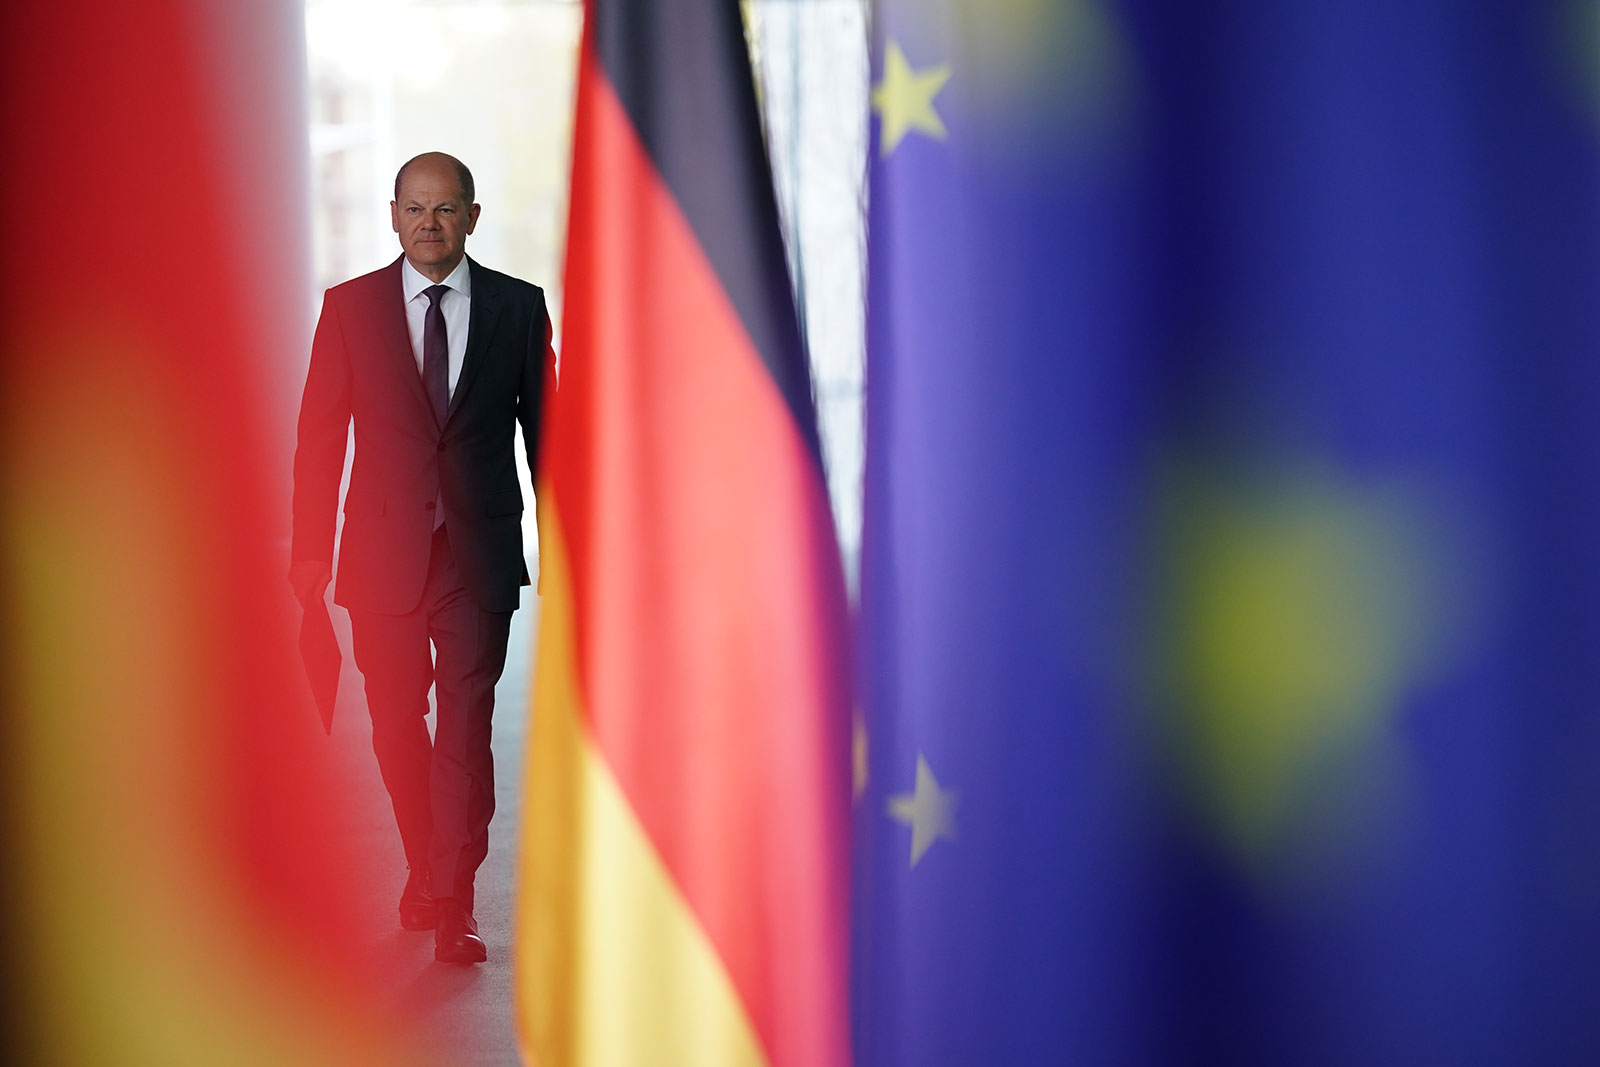 German Chancellor Olaf Scholz issues a statement following a virtual meeting with world leaders at the Chancellery on Tuesday, April 19, in Berlin.